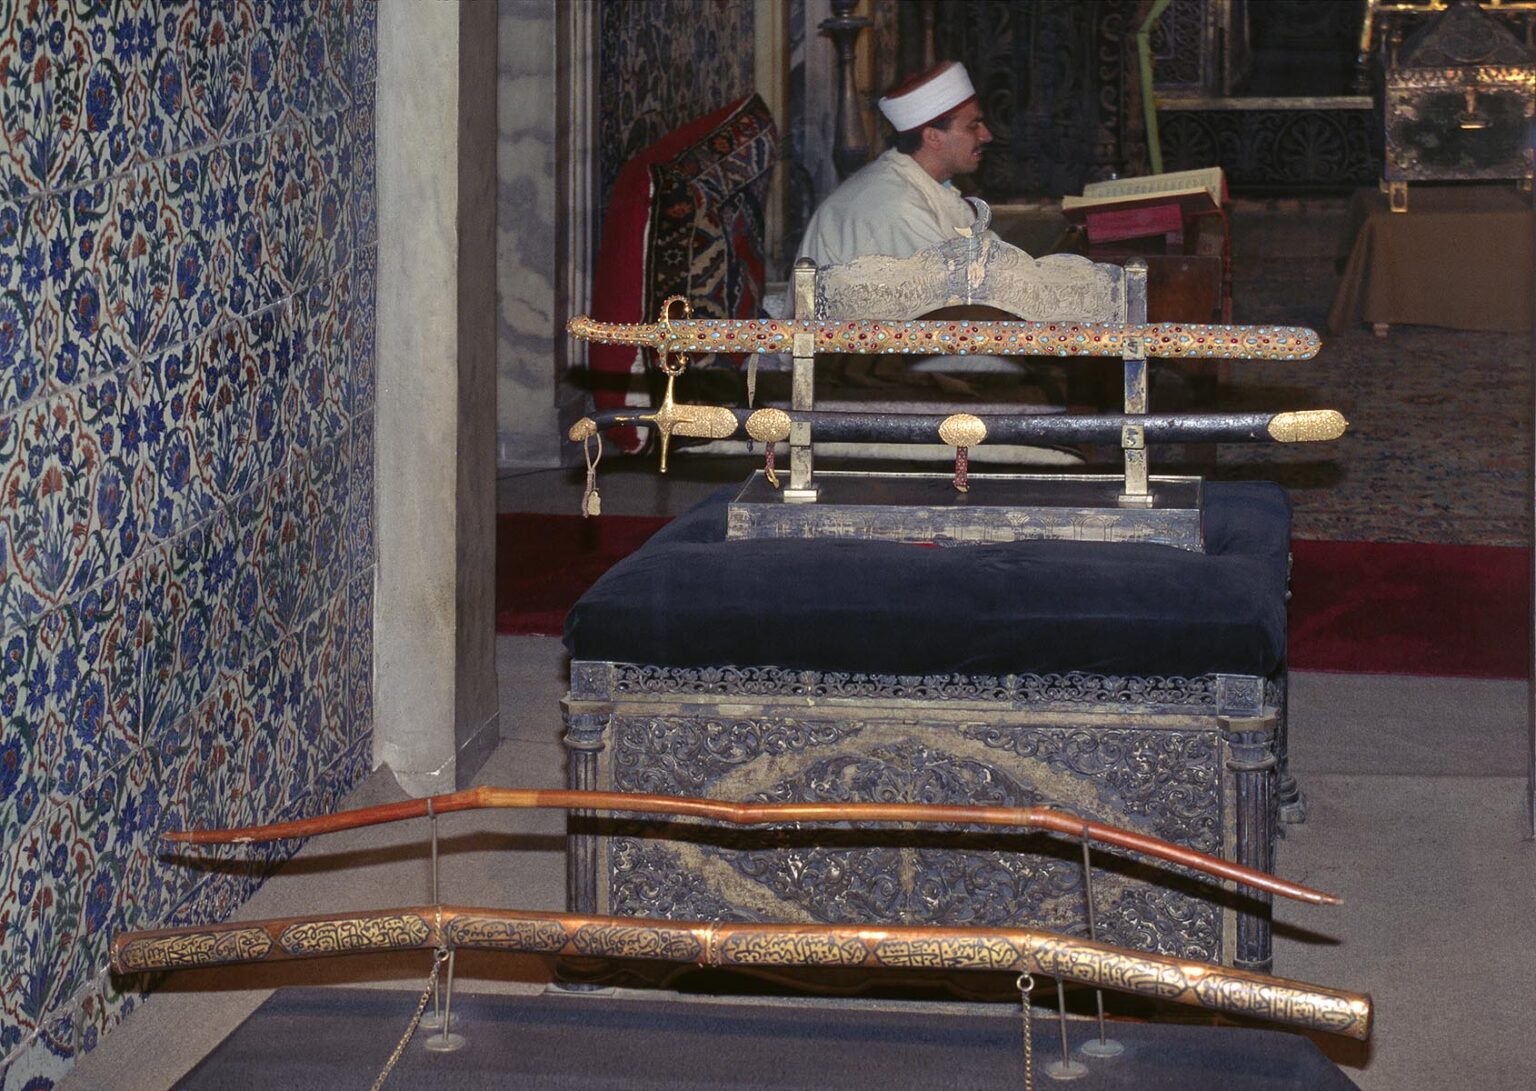 Swords and bow of the Sultan with singing holy man - Topkapi Palace Museum, Istanbul, Turkey